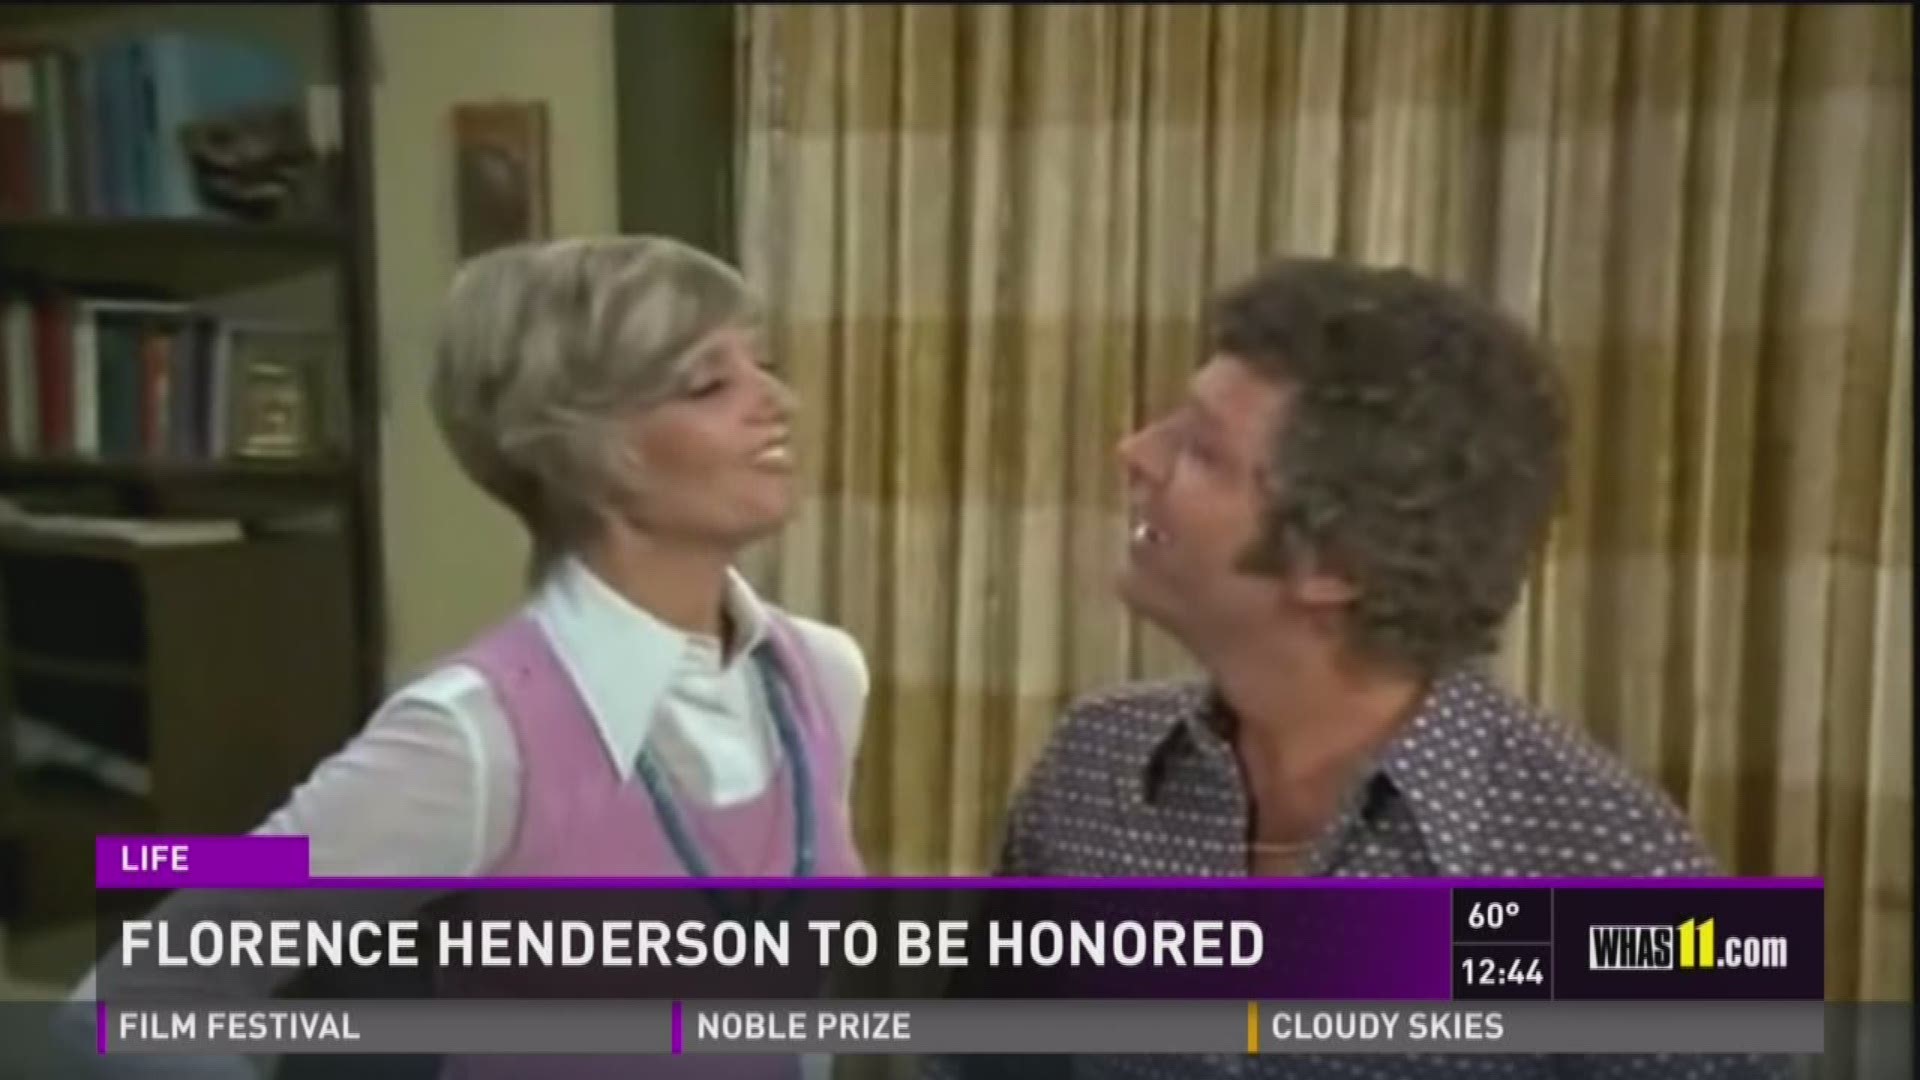 Florence Henderson to be honored